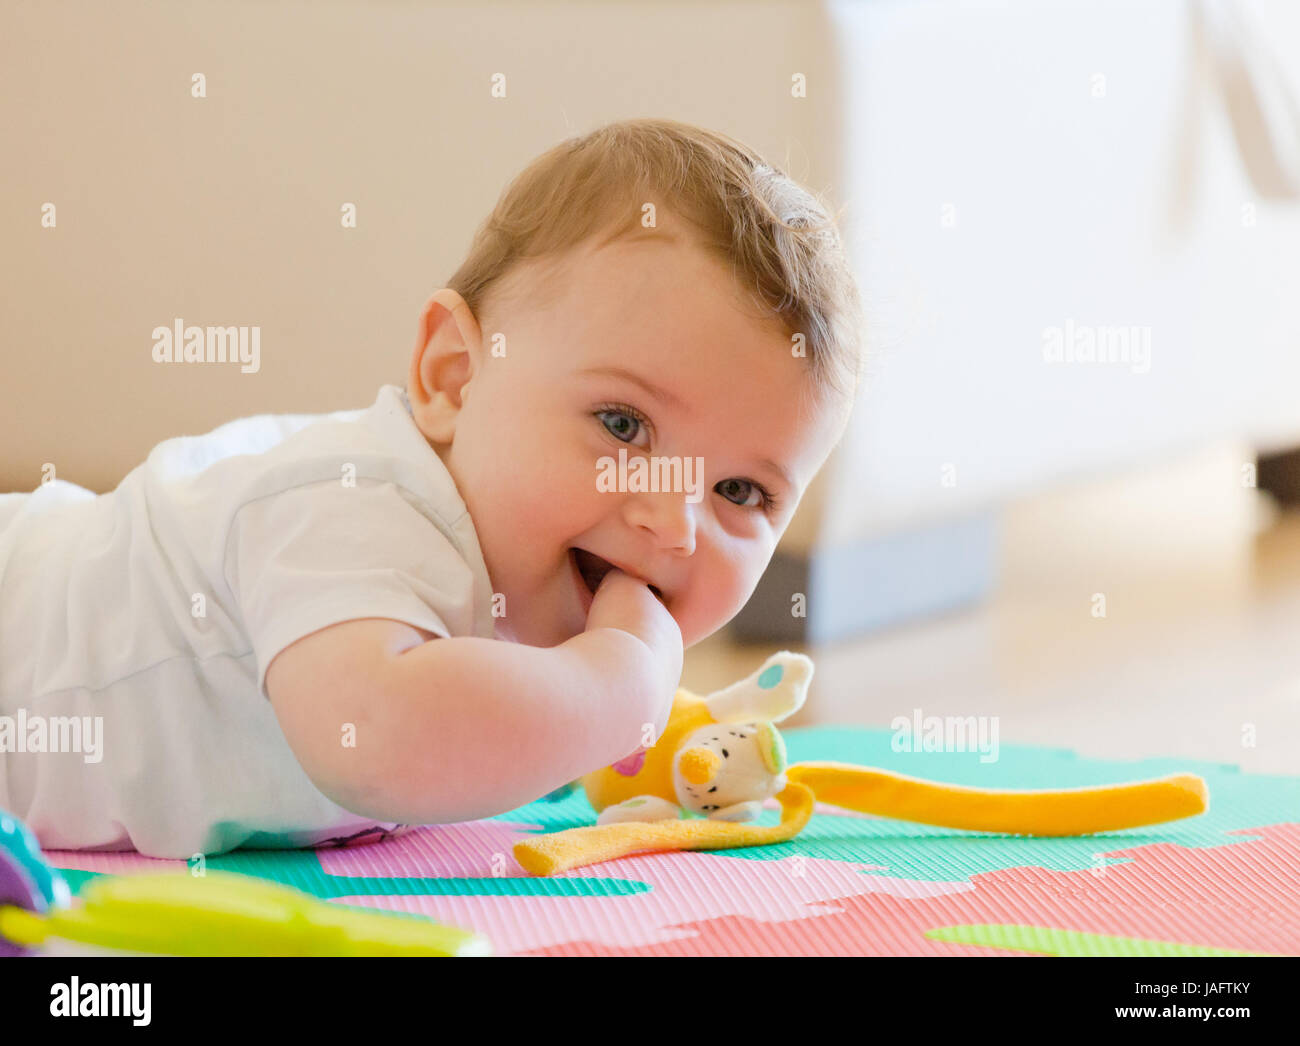 Toddler plays on the colored rubber mat. Stock Photo